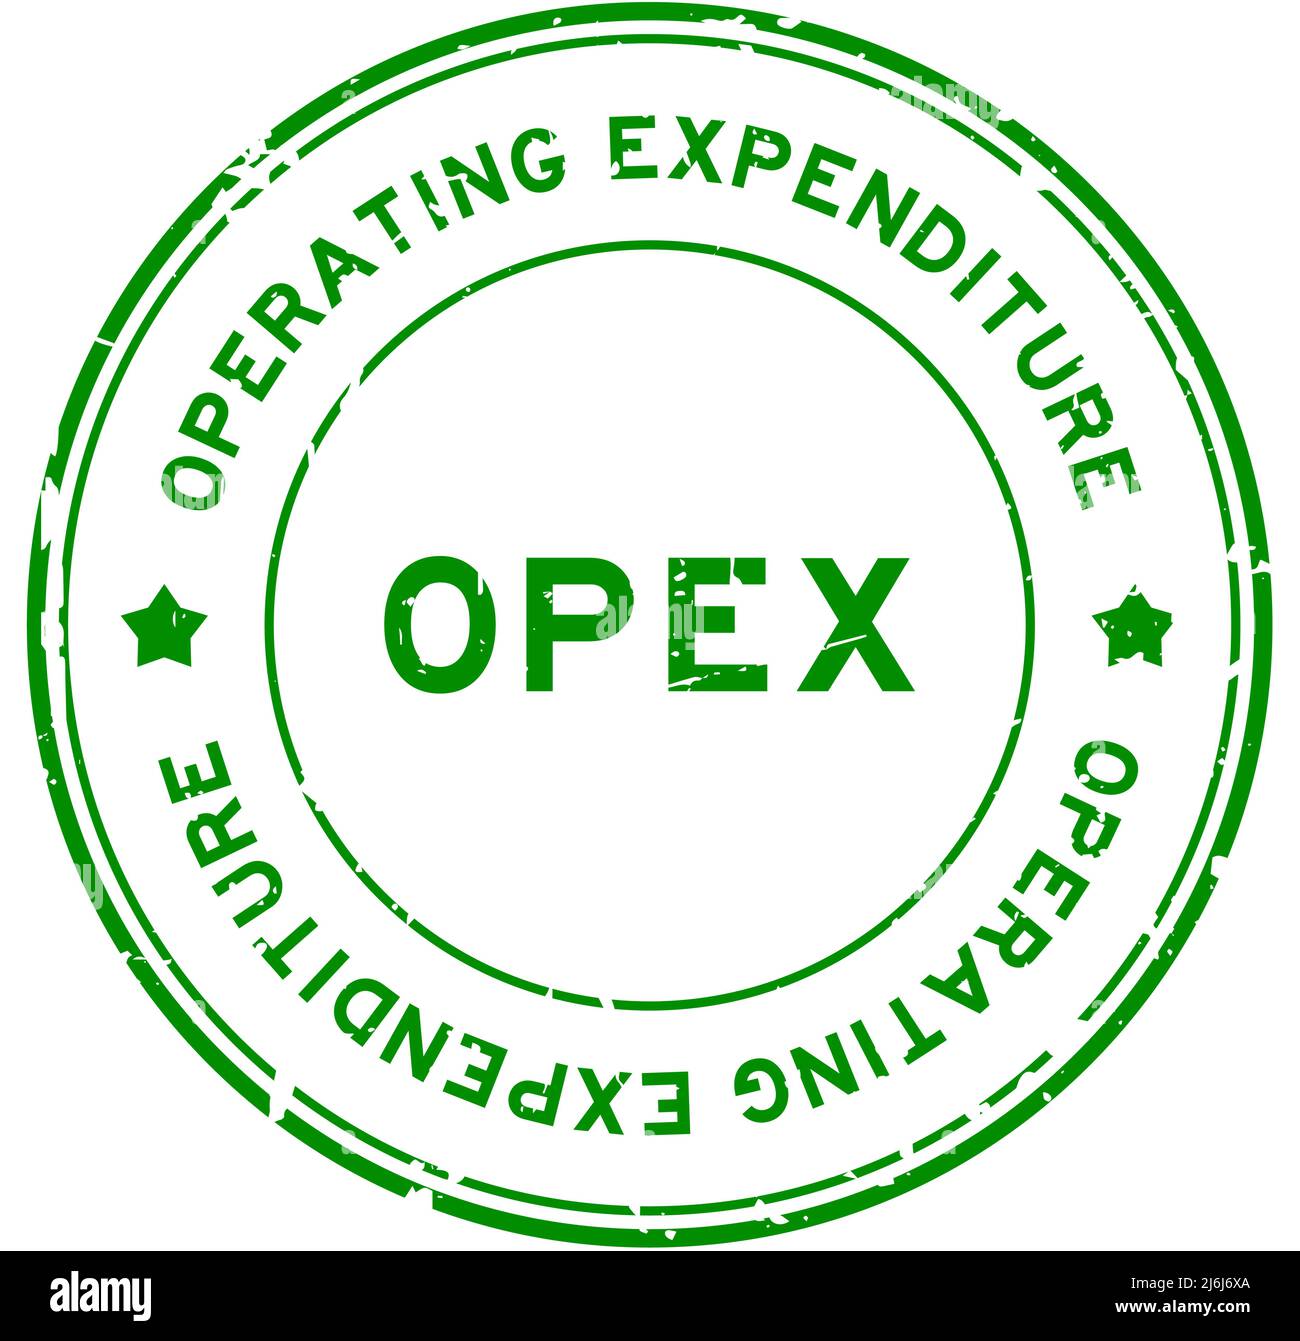 Grunge green OPEX operating expendiure word round rubber seal stamp on white background Stock Vector